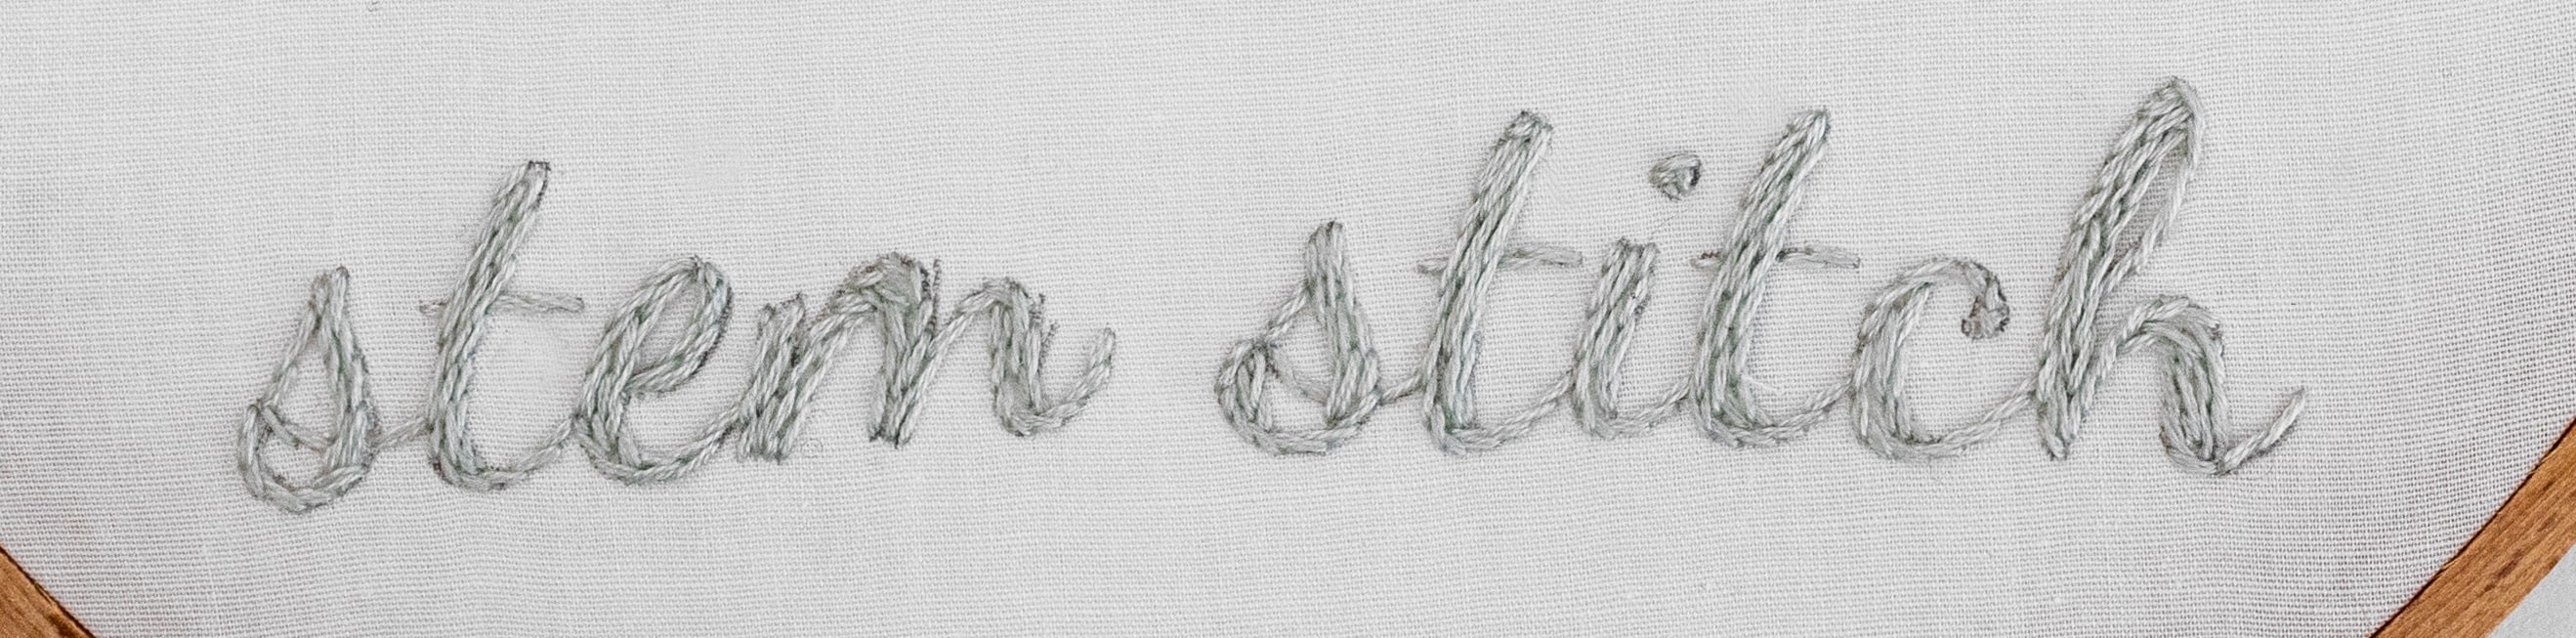 This is the word 'stem stitch' is stitched using stem stitch.